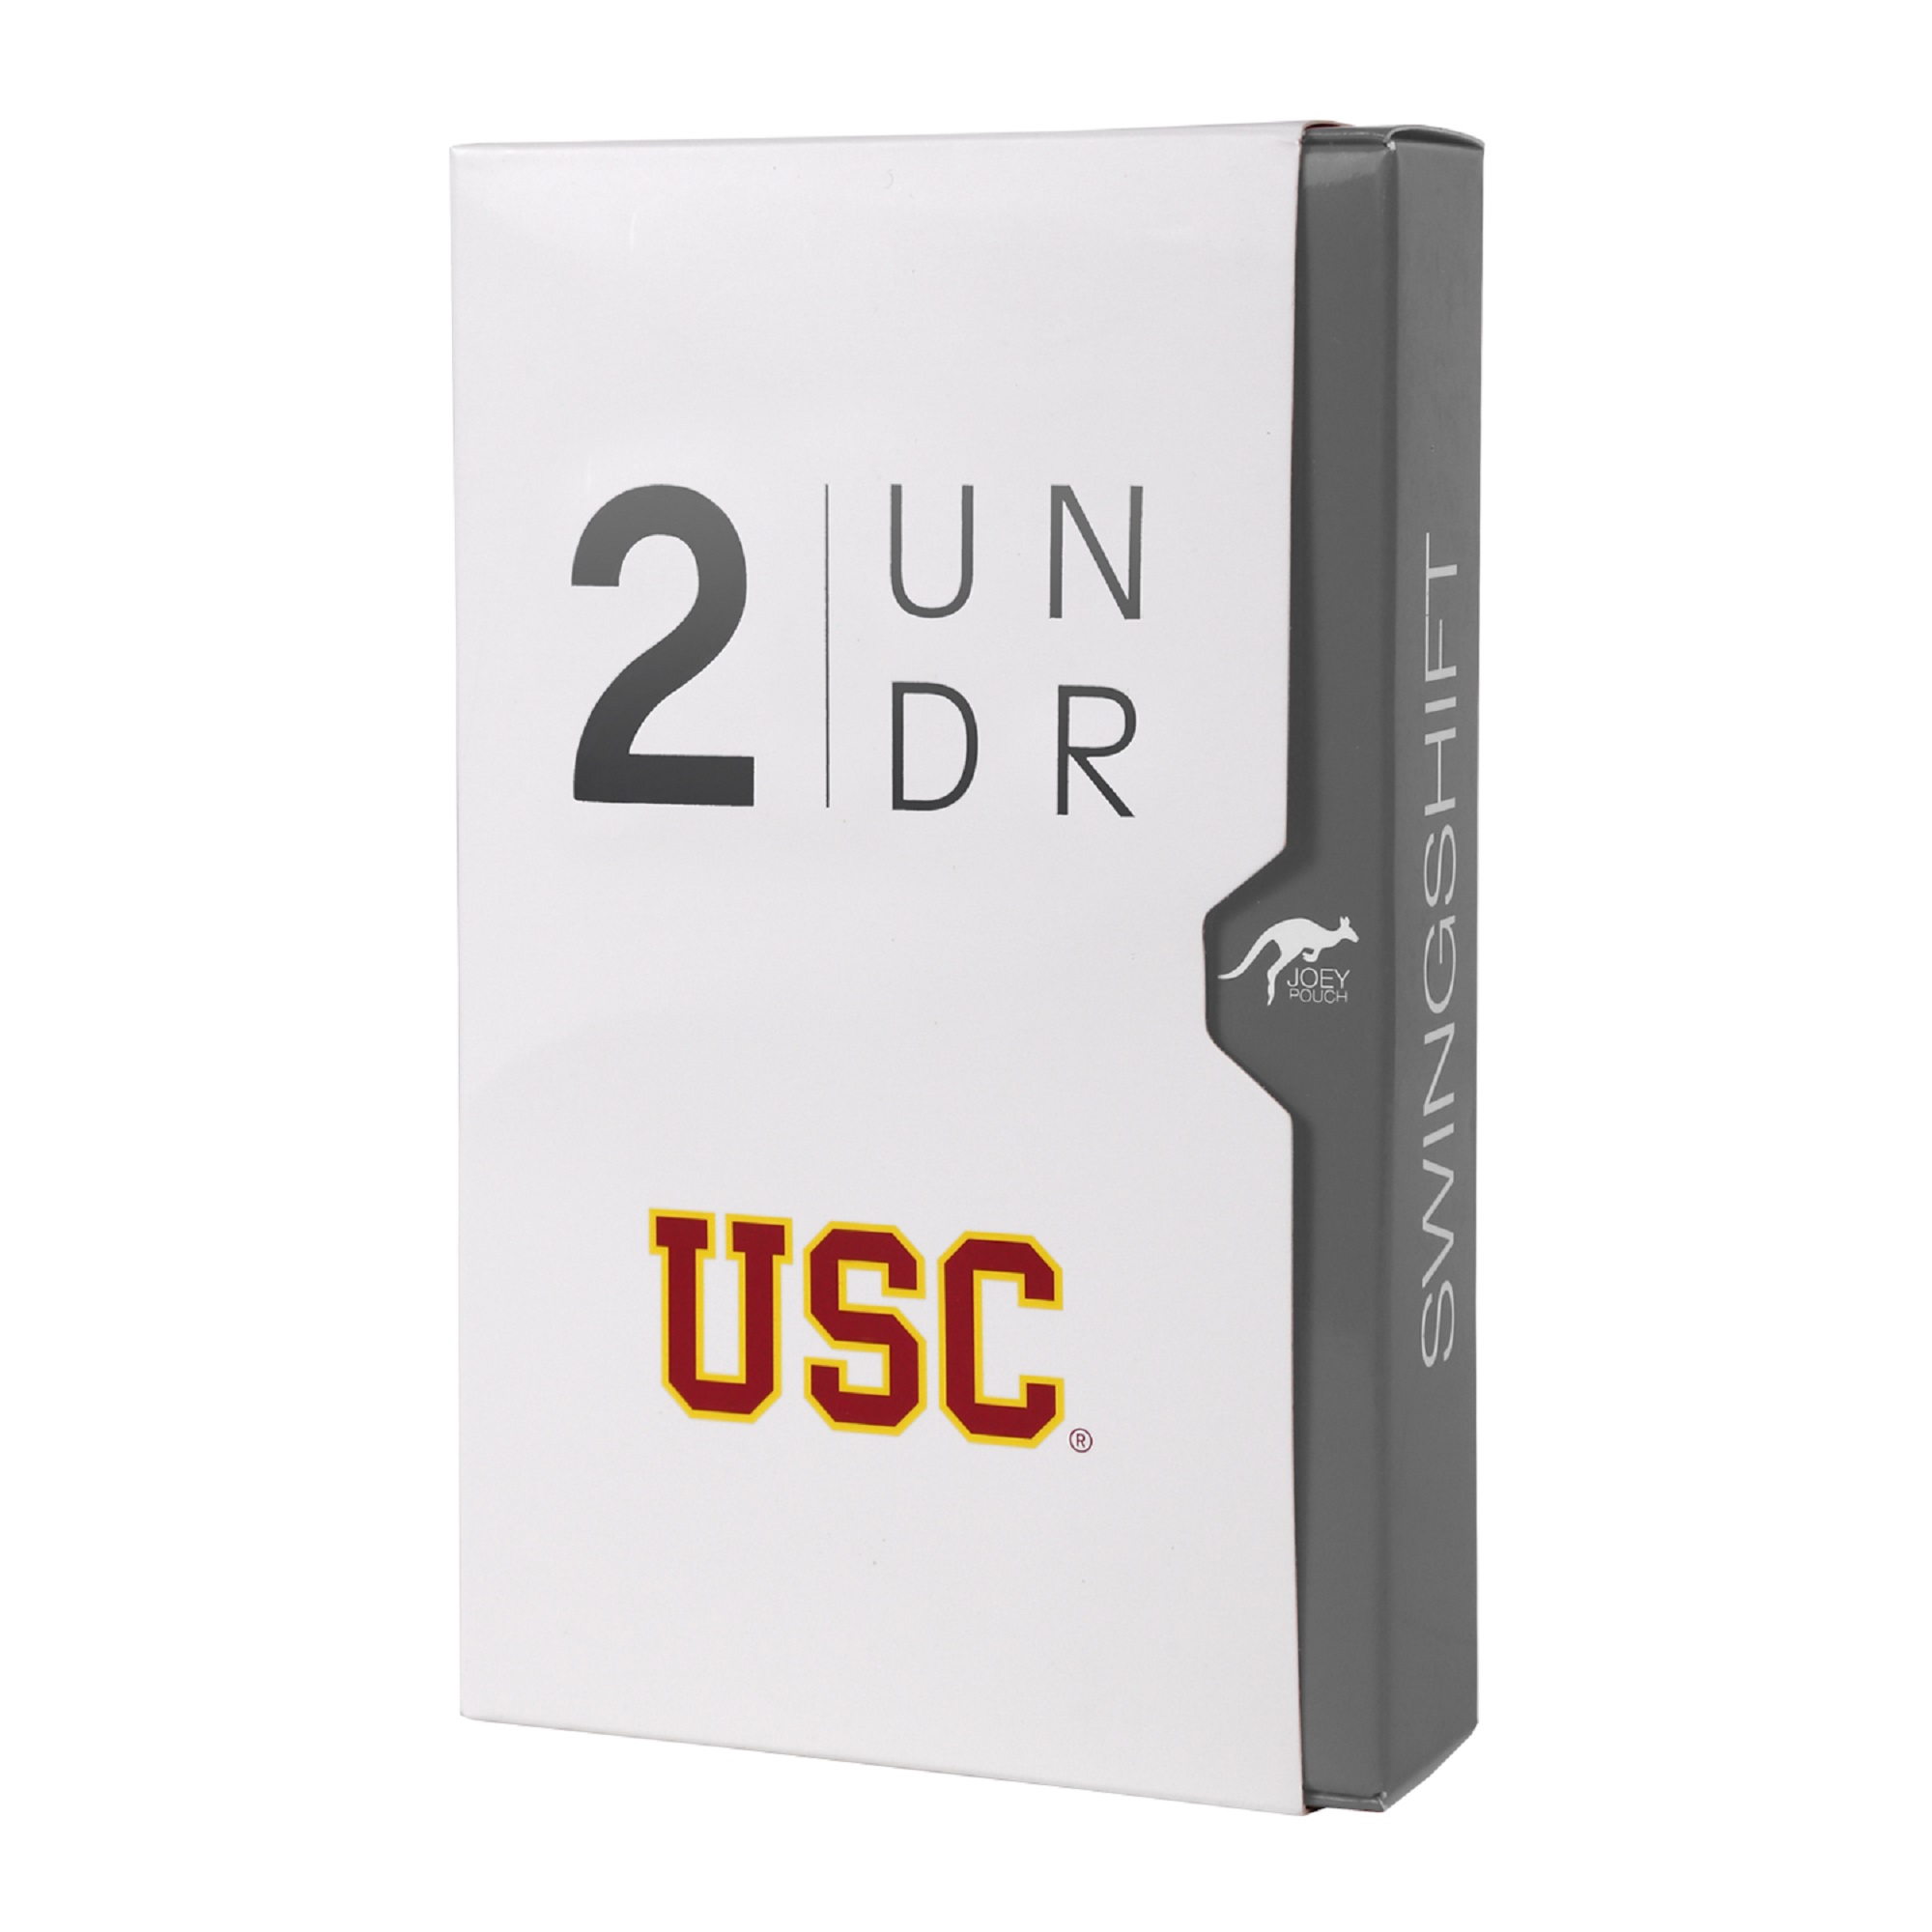 2UNDR NCAA Team Colors Men's Swing Shift Boxers (SoCal Grey, Small) - image 2 of 5